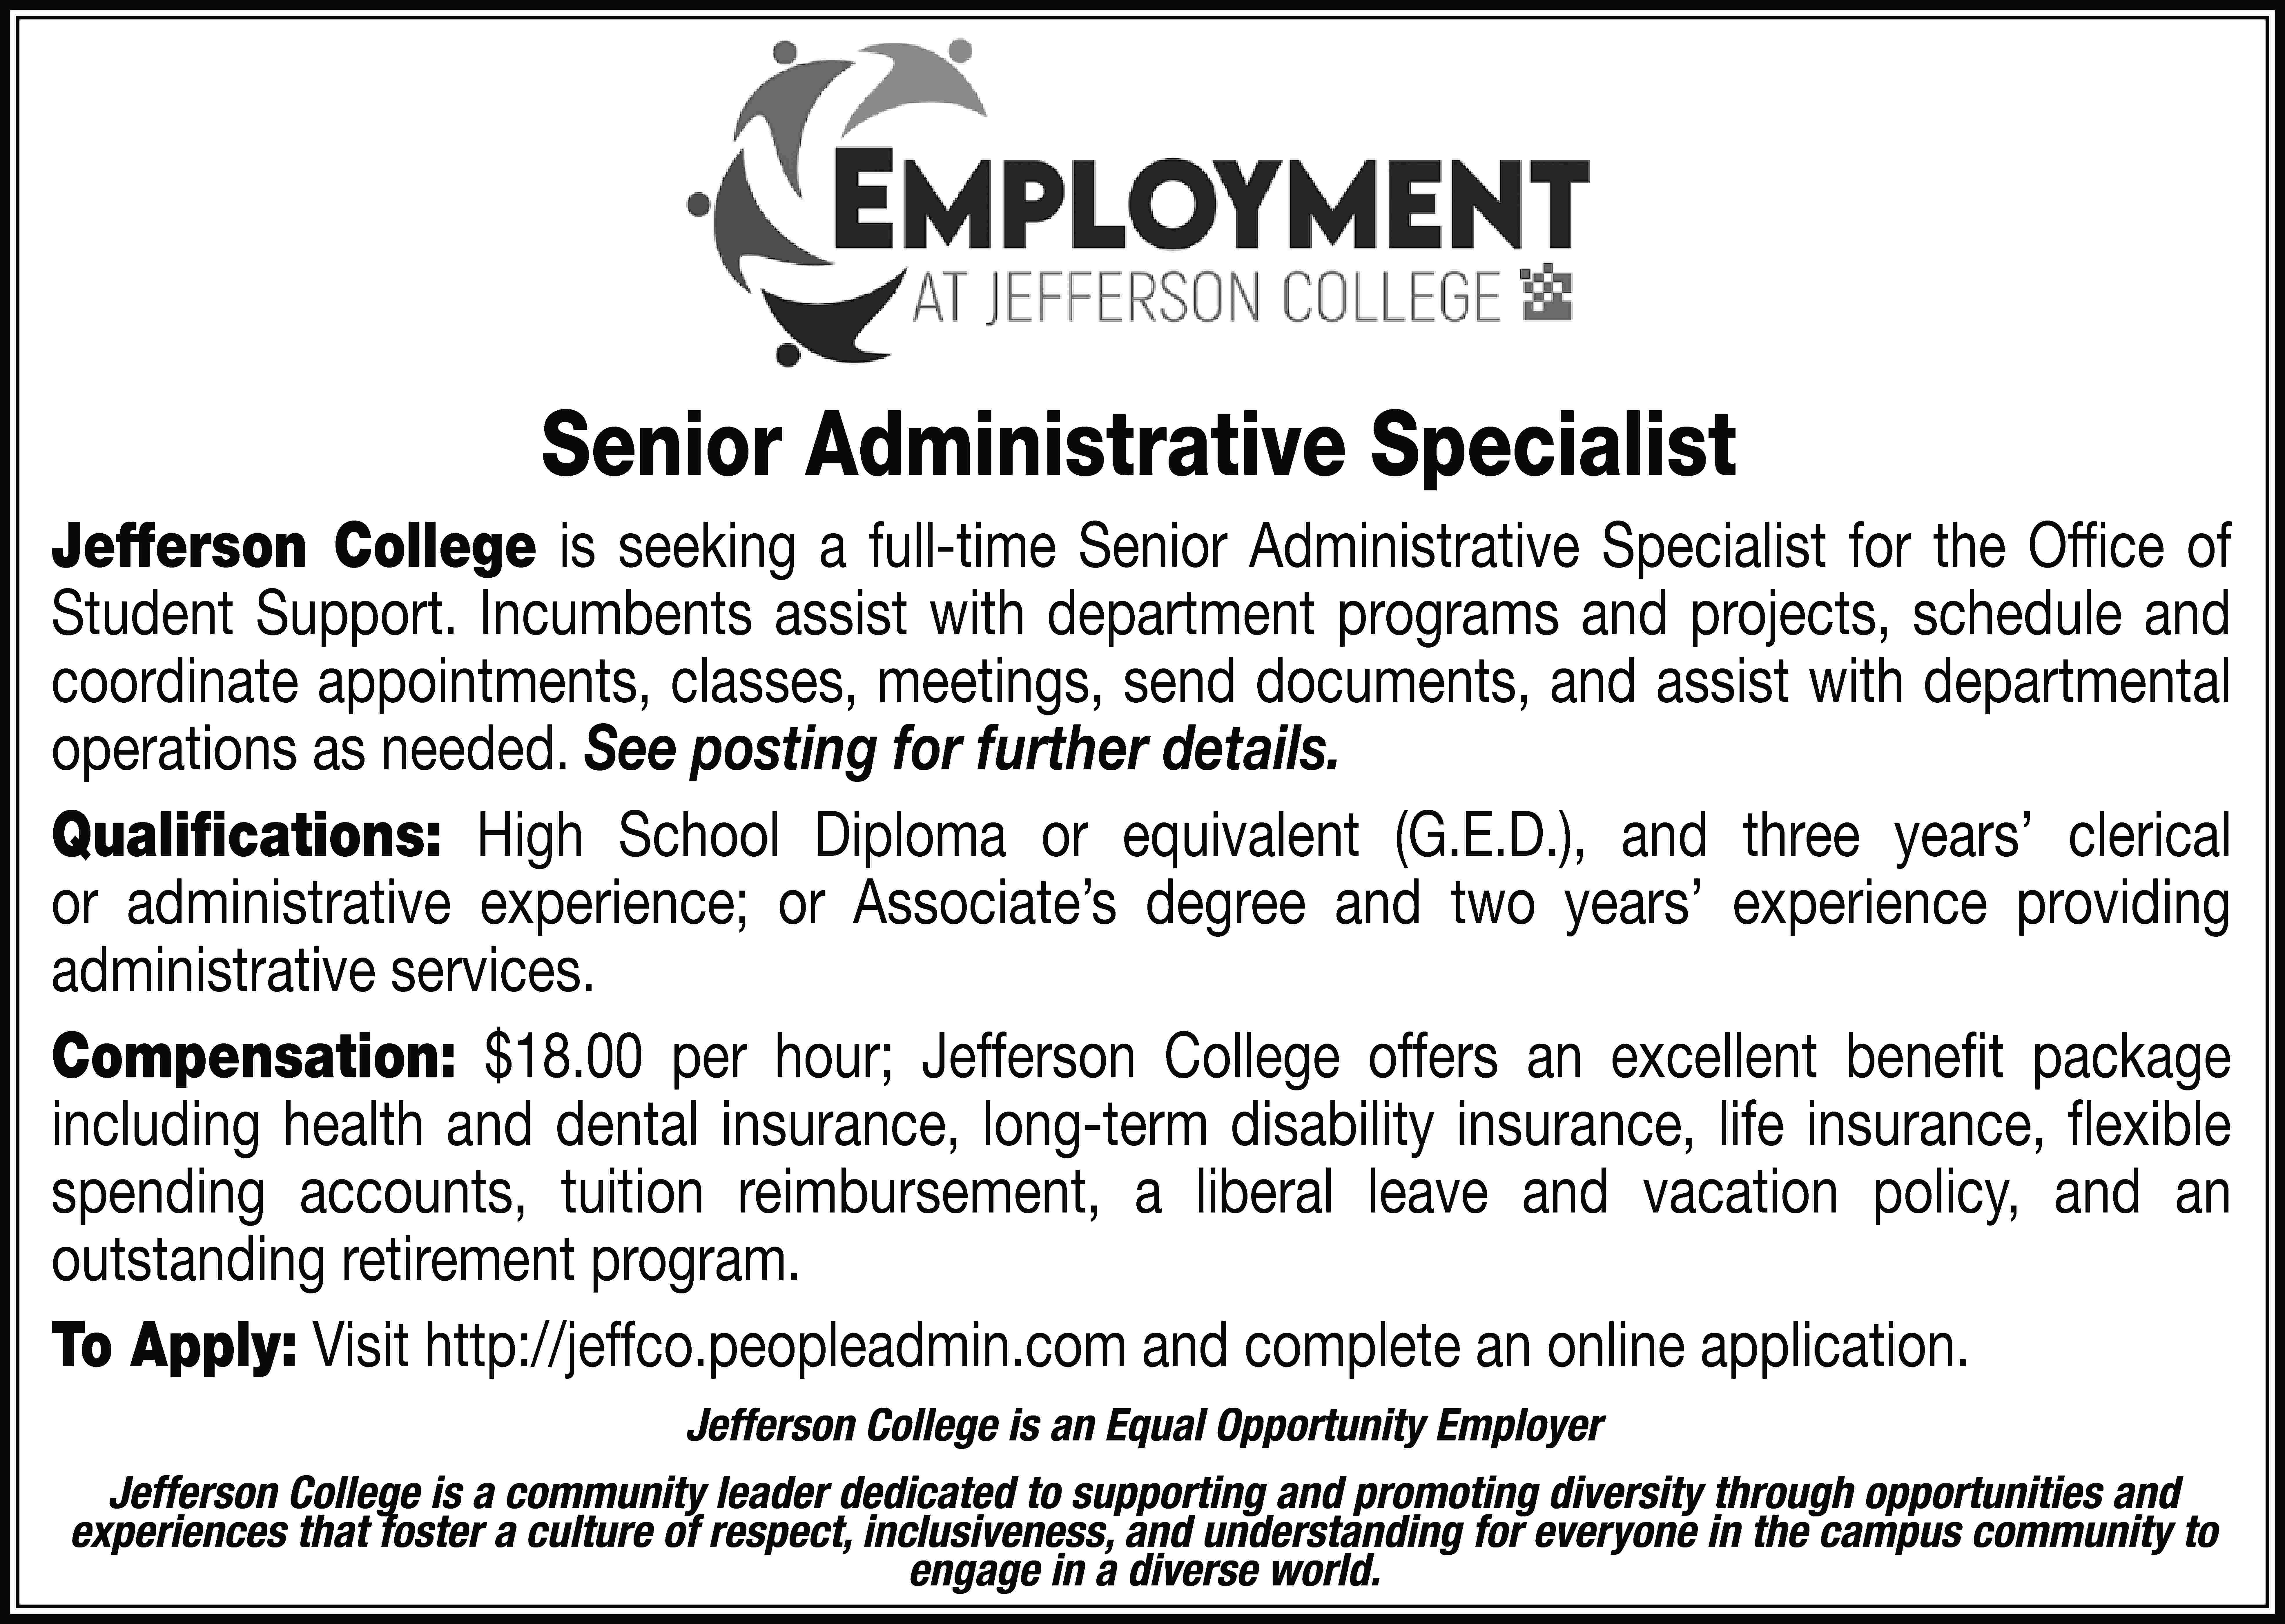 Senior Administrative Specialist Jefferson College  Senior Administrative Specialist Jefferson College is seeking a full-time Senior Administrative Specialist for the Office of Student Support. Incumbents assist with department programs and projects, schedule and coordinate appointments, classes, meetings, send documents, and assist with departmental operations as needed. See posting for further details. Qualifications: High School Diploma or equivalent (G.E.D.), and three years’ clerical or administrative experience; or Associate’s degree and two years’ experience providing administrative services. Compensation: $18.00 per hour; Jefferson College offers an excellent benefit package including health and dental insurance, long-term disability insurance, life insurance, flexible spending accounts, tuition reimbursement, a liberal leave and vacation policy, and an outstanding retirement program. To Apply: Visit http://jeffco.peopleadmin.com and complete an online application. Jefferson College is an Equal Opportunity Employer Jefferson College is a community leader dedicated to supporting and promoting diversity through opportunities and experiences that foster a culture of respect, inclusiveness, and understanding for everyone in the campus community to engage in a diverse world.